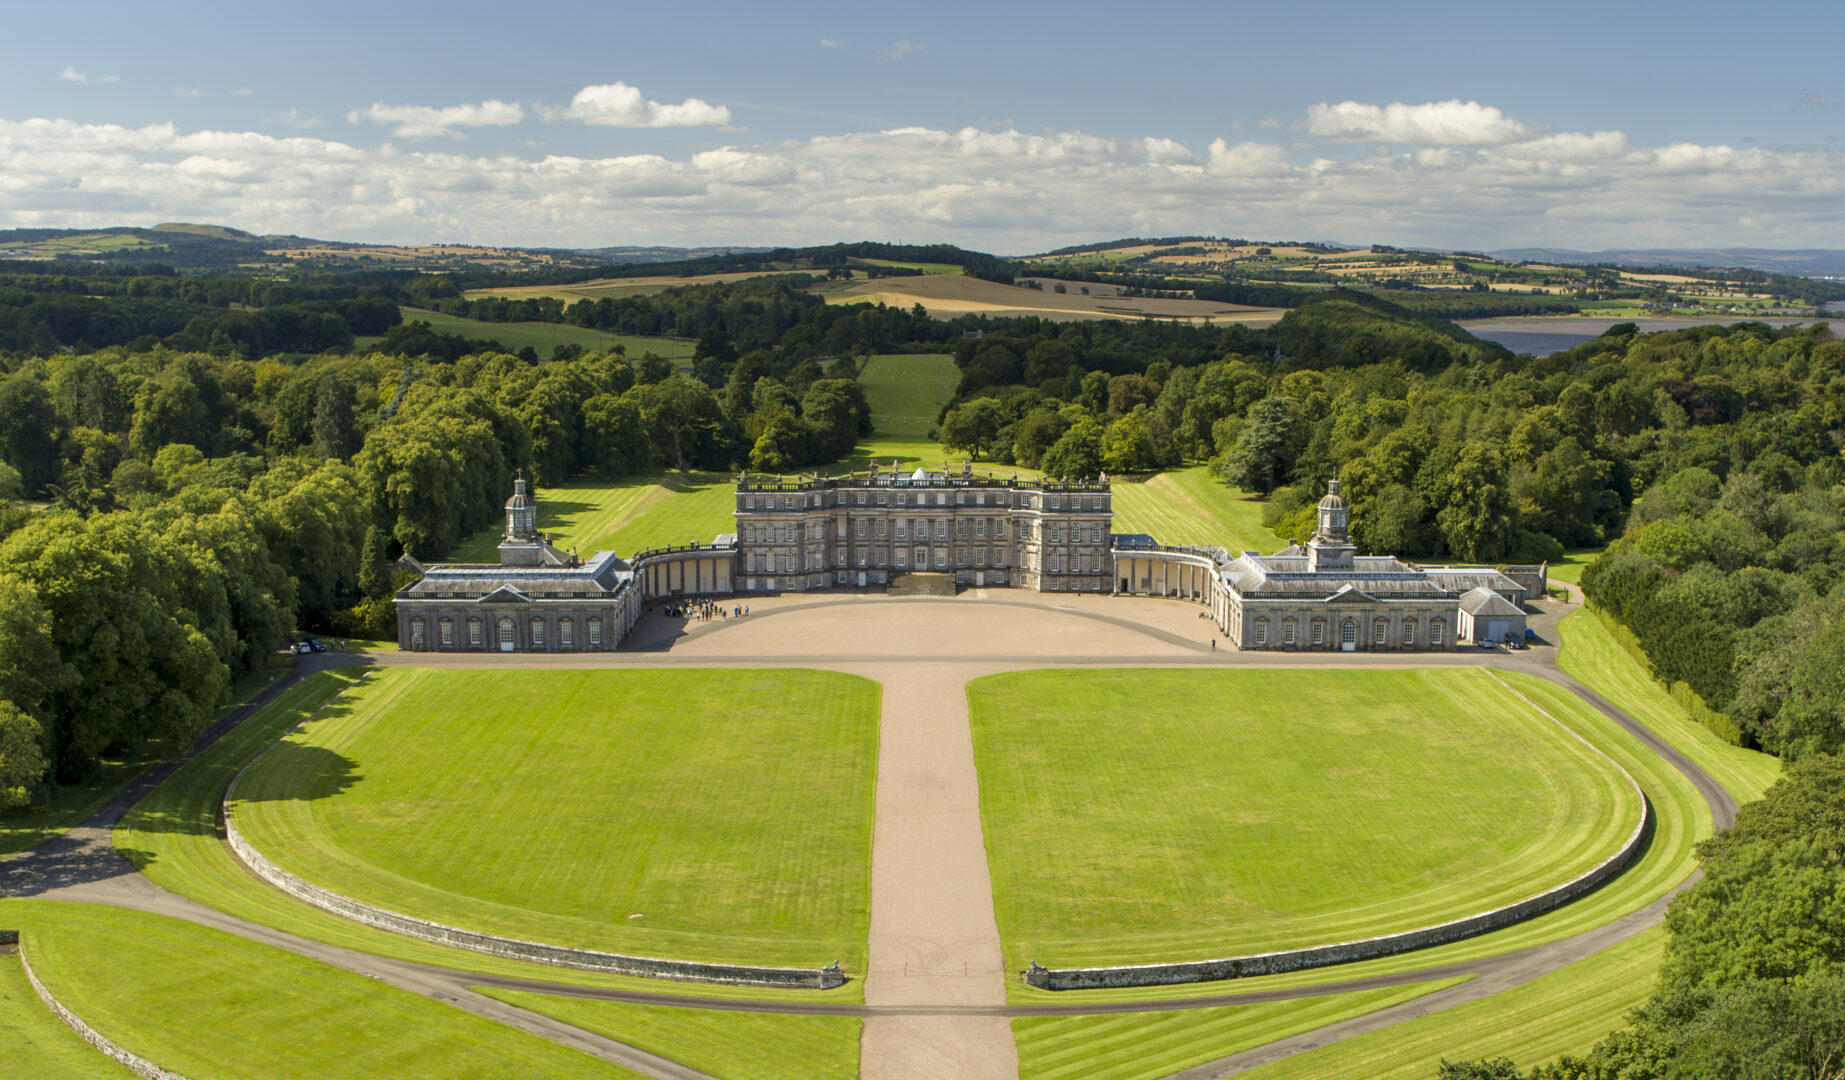 Aerial view of Hopetoun House by Peter Keith Photography.